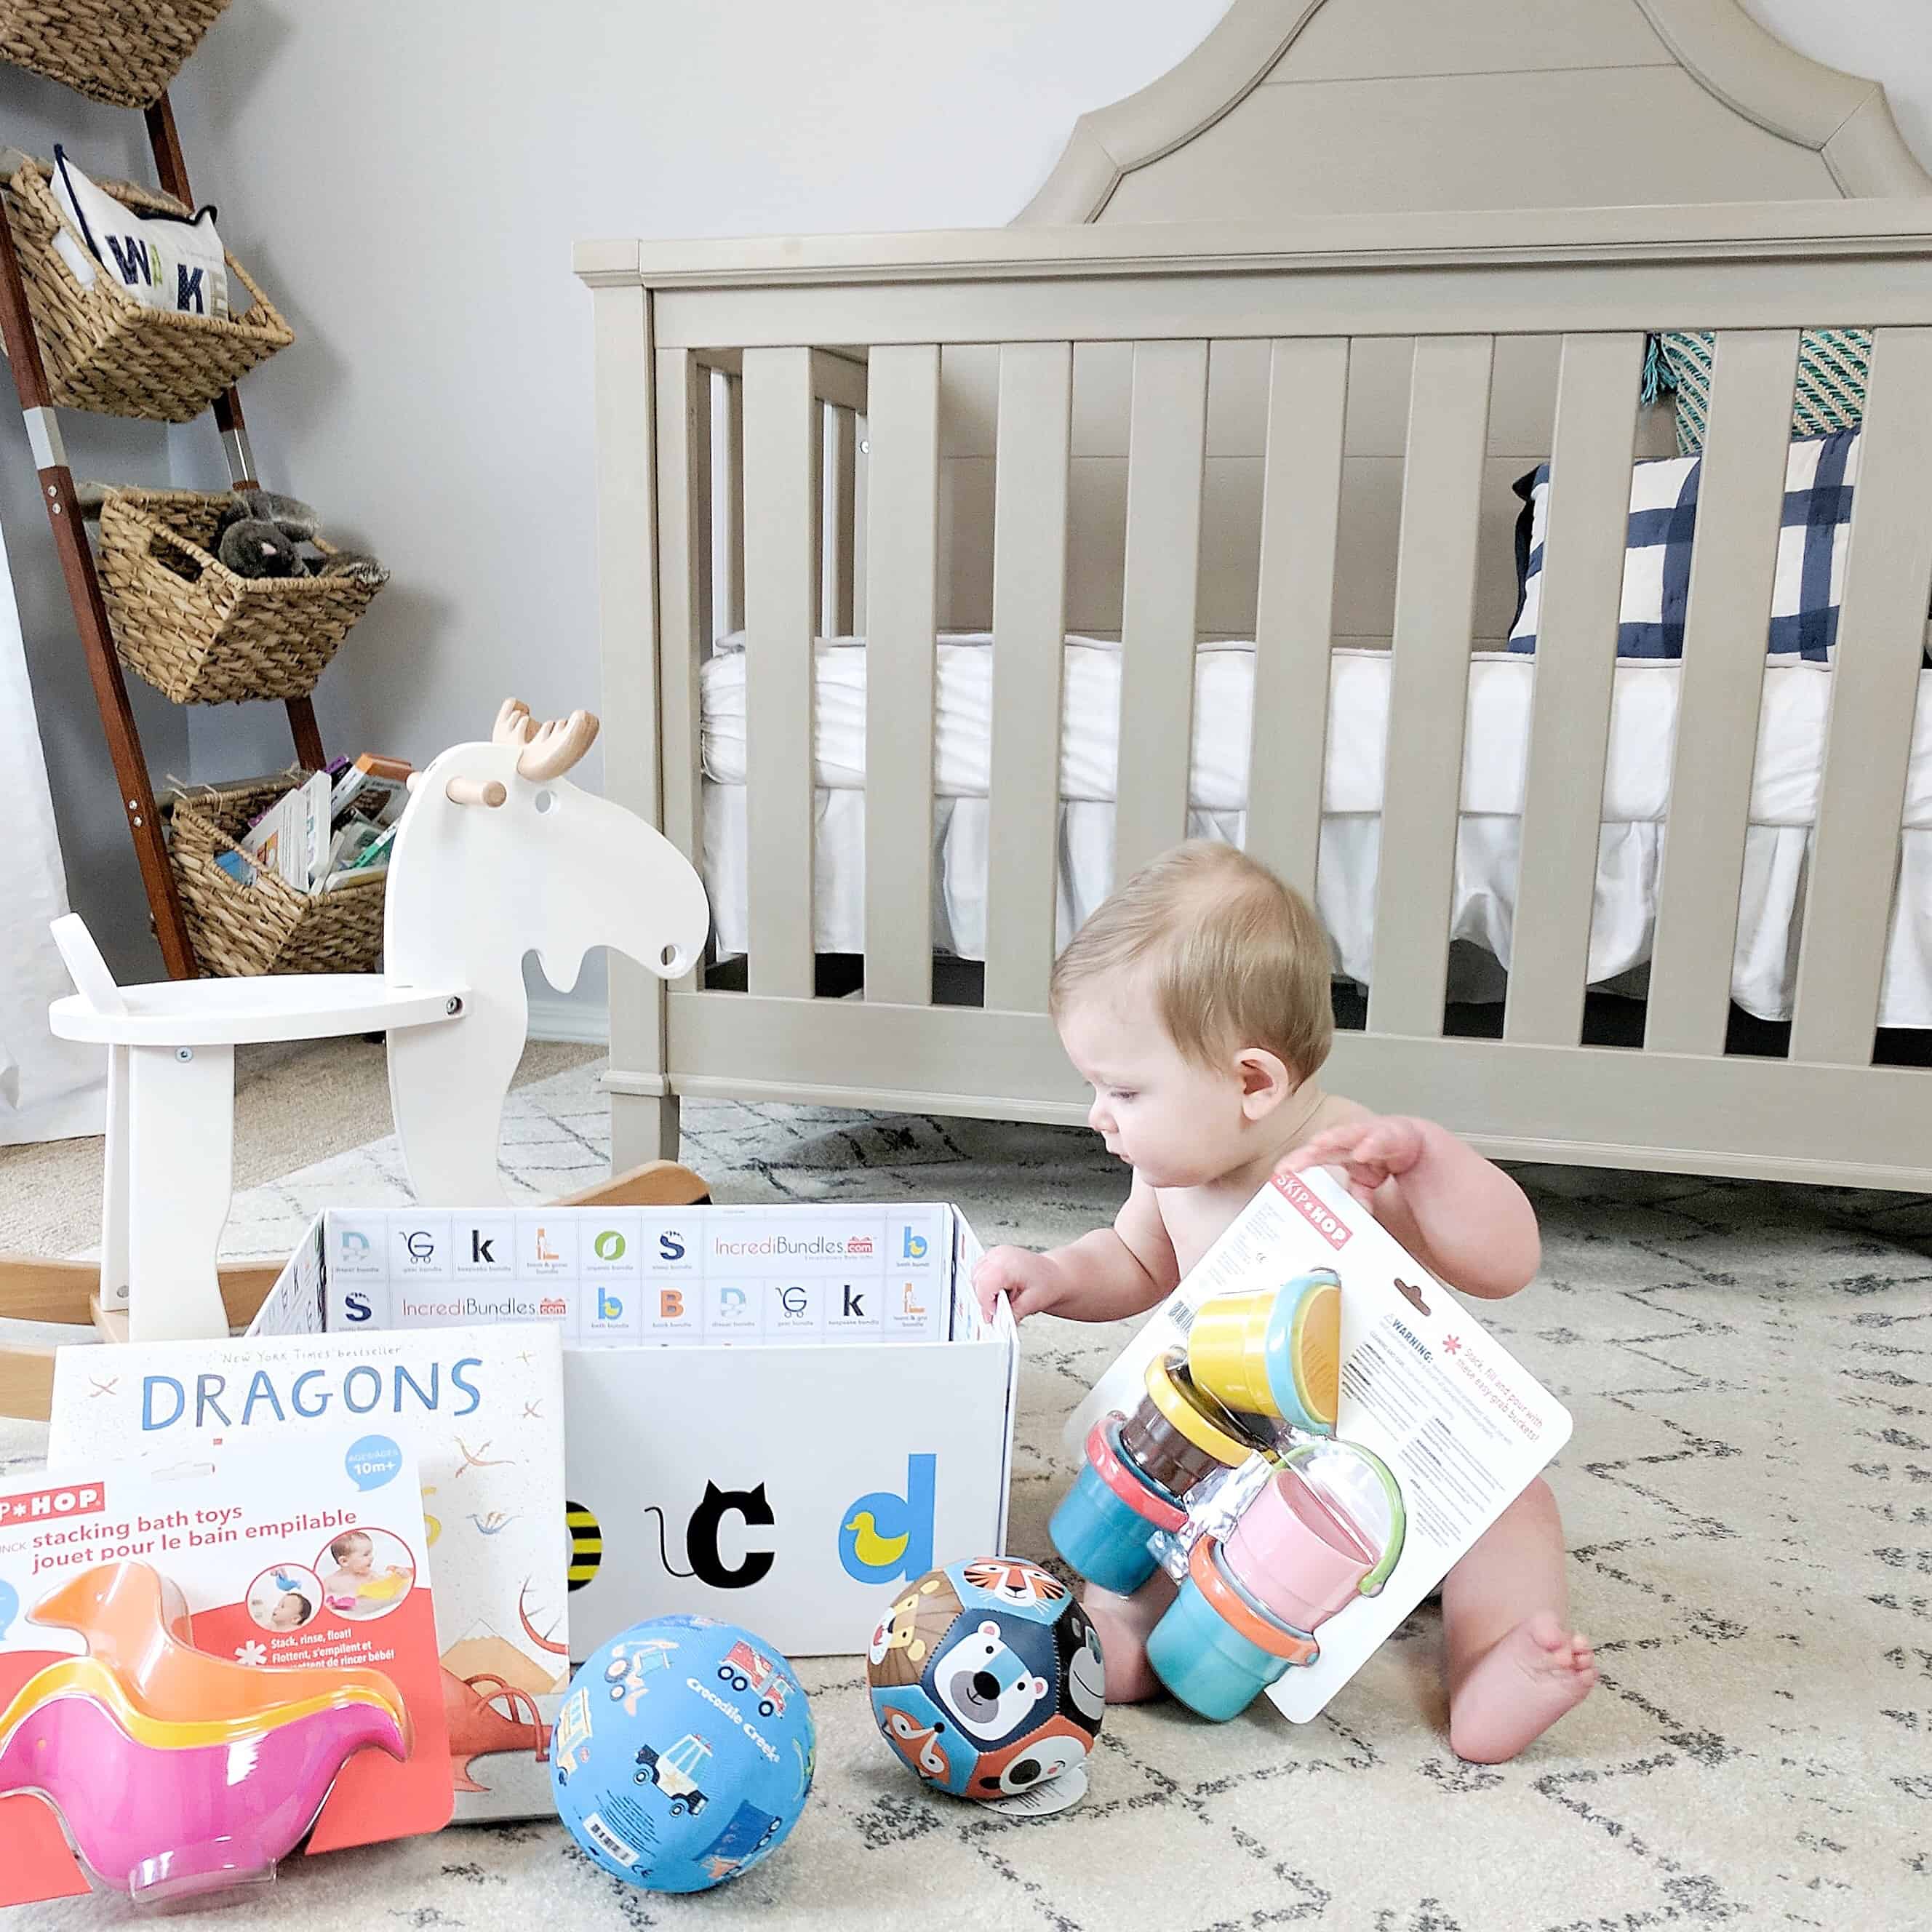 Baby on floor by rocking horse and crib with gifts